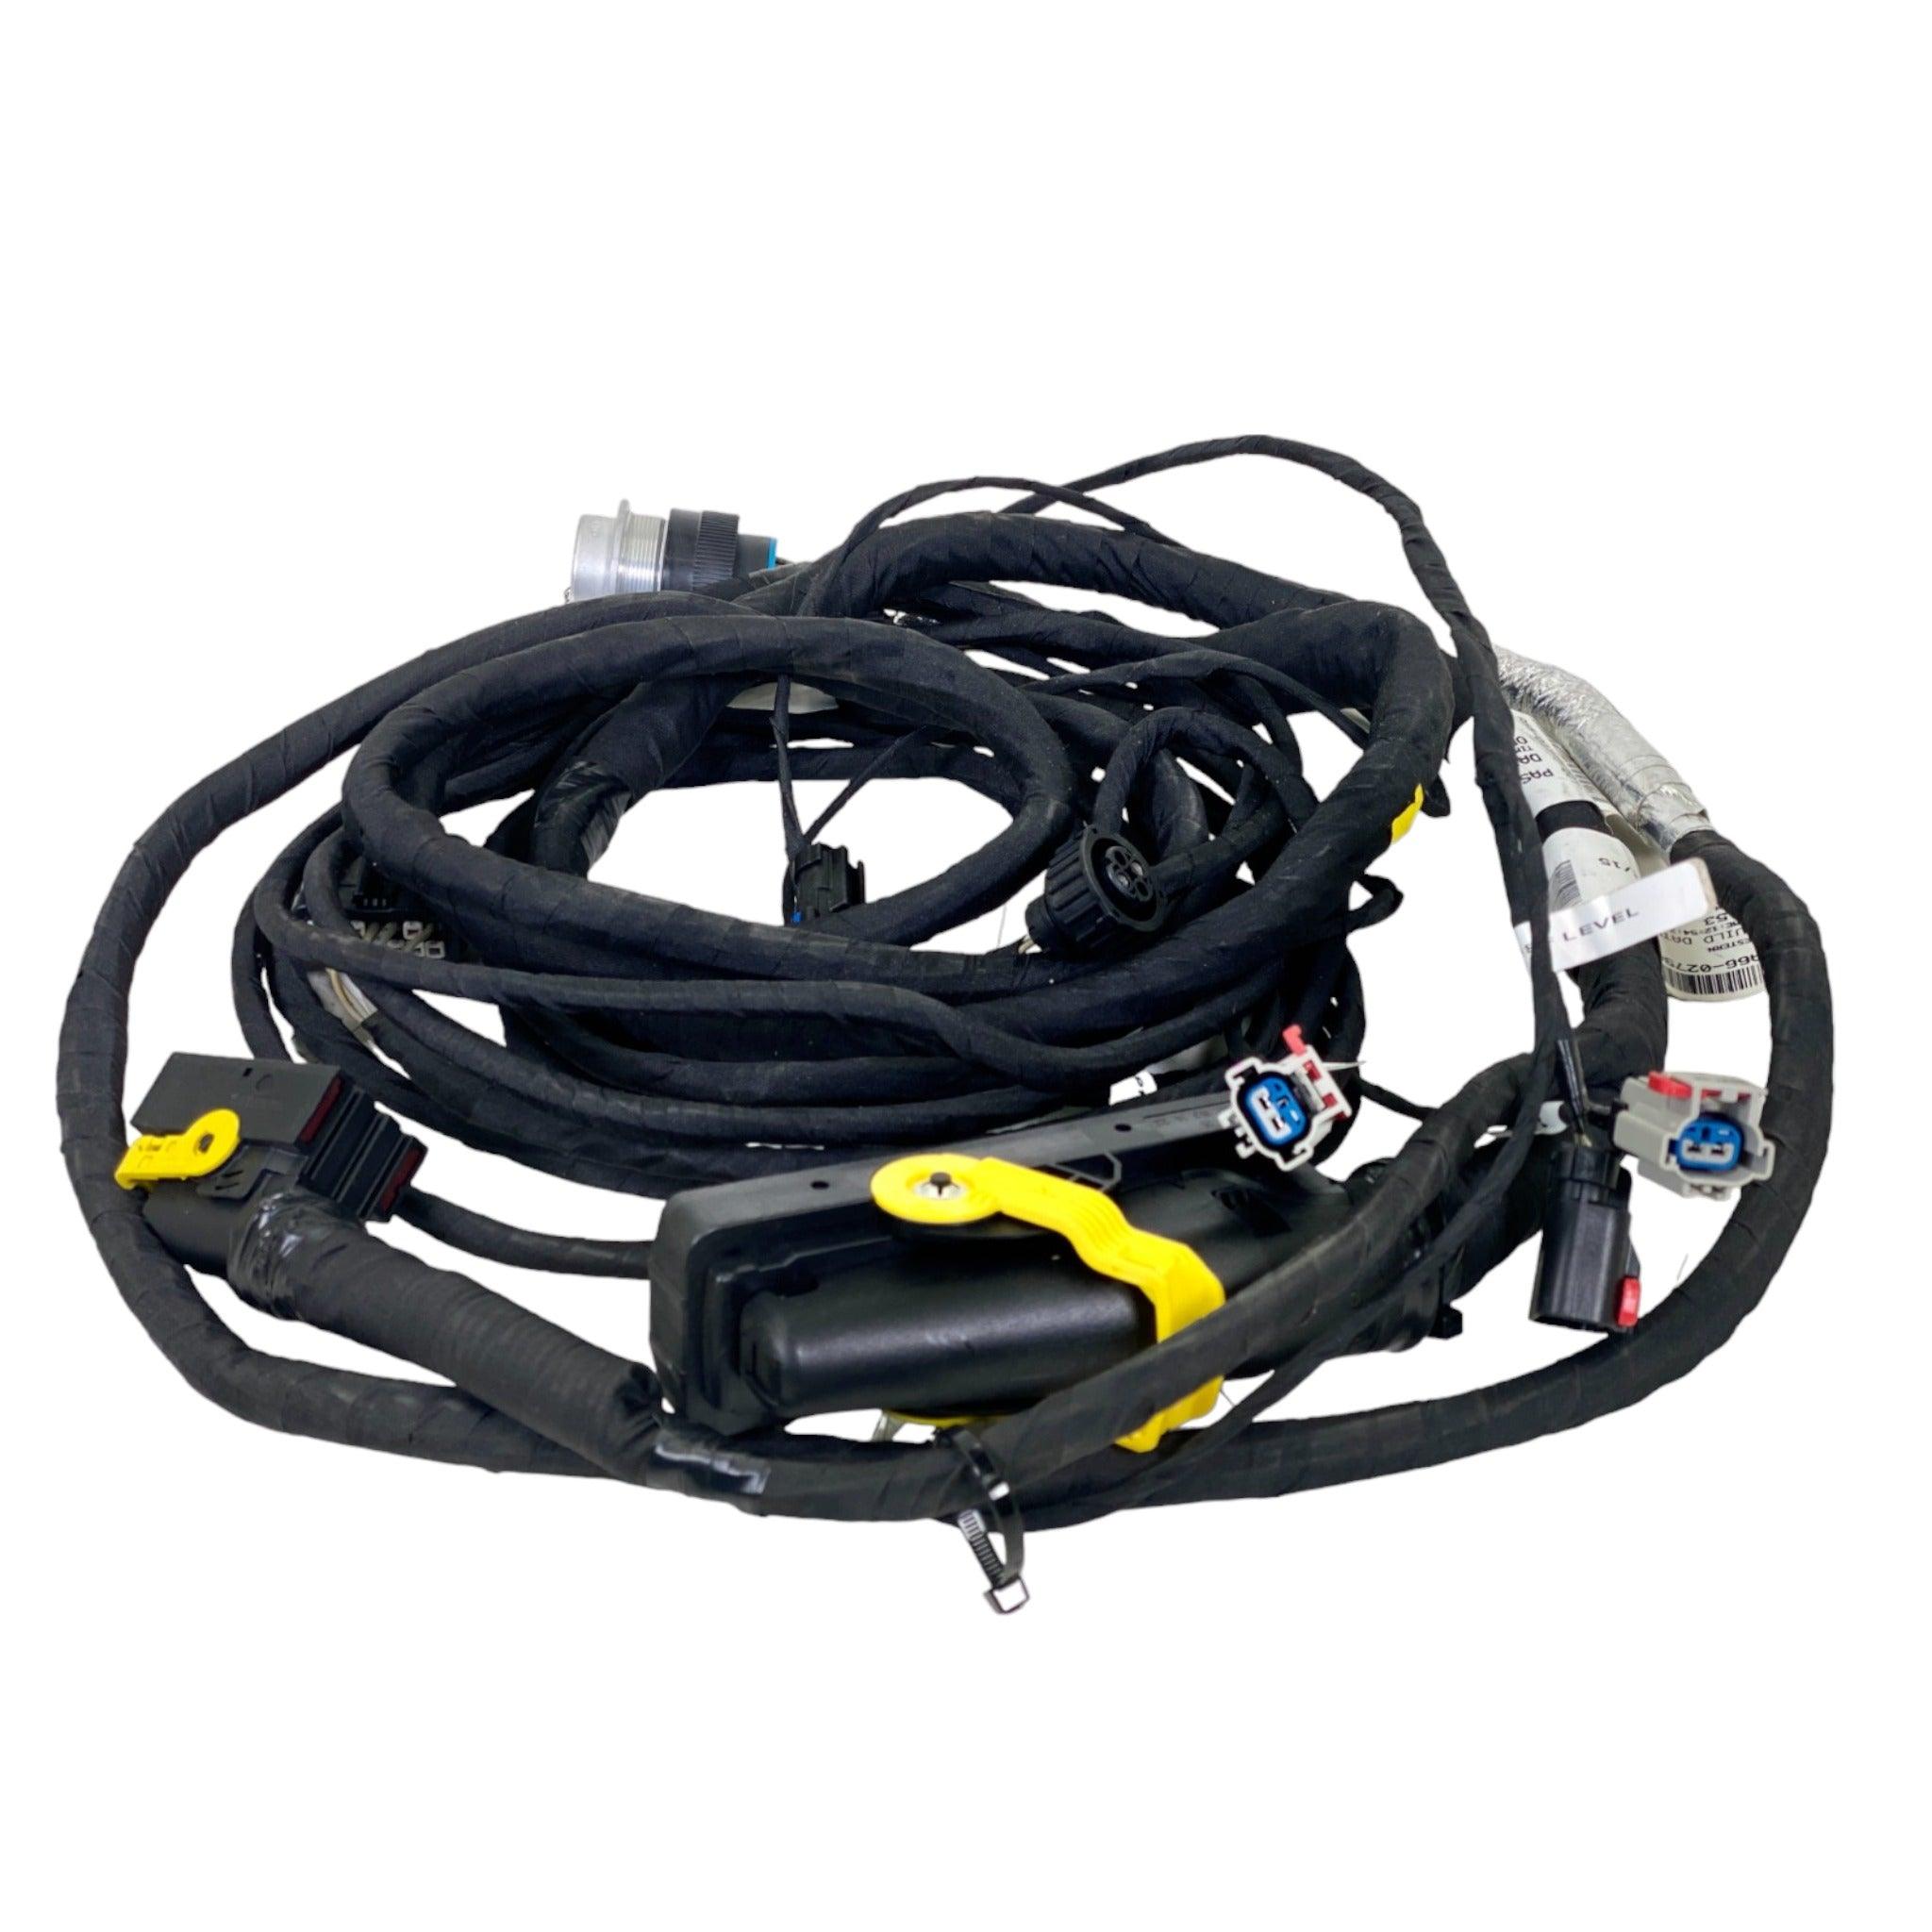 A66-02790-001 Genuine Freightliner® Kit Harness Ats - ADVANCED TRUCK PARTS